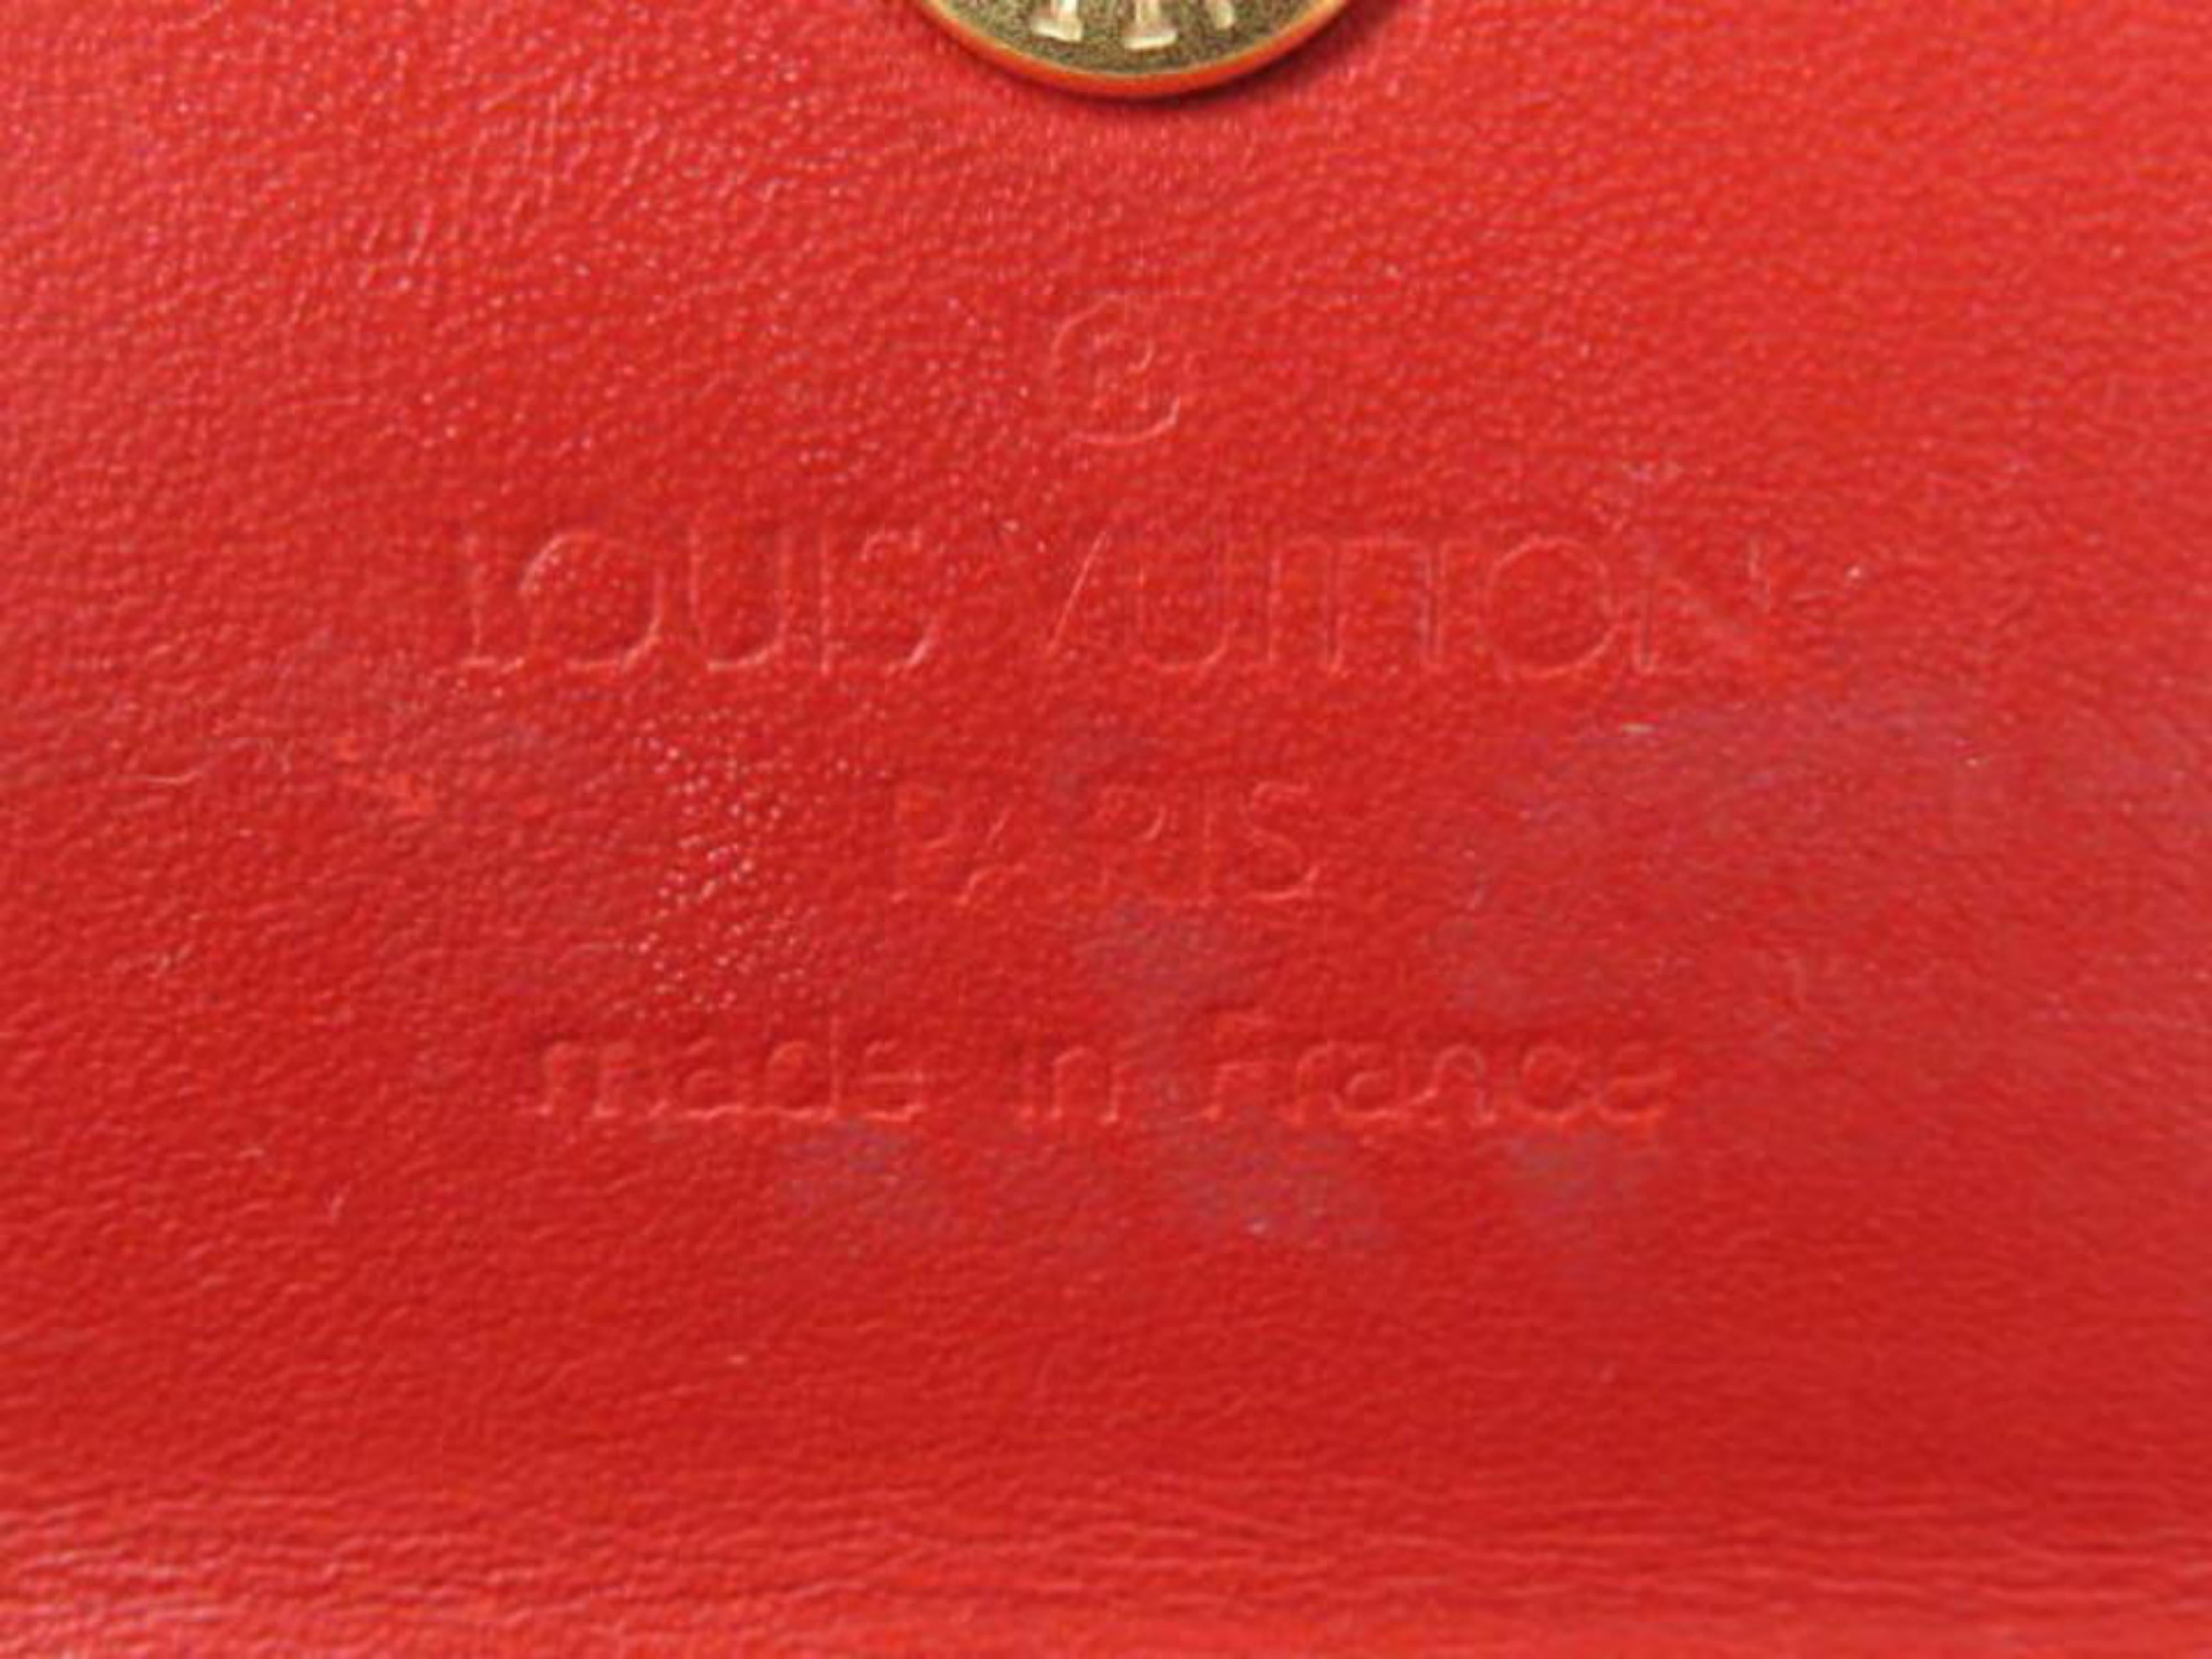 Louis Vuitton Red Monogram Vernis Card Case 226250 Wallet In Fair Condition For Sale In Forest Hills, NY